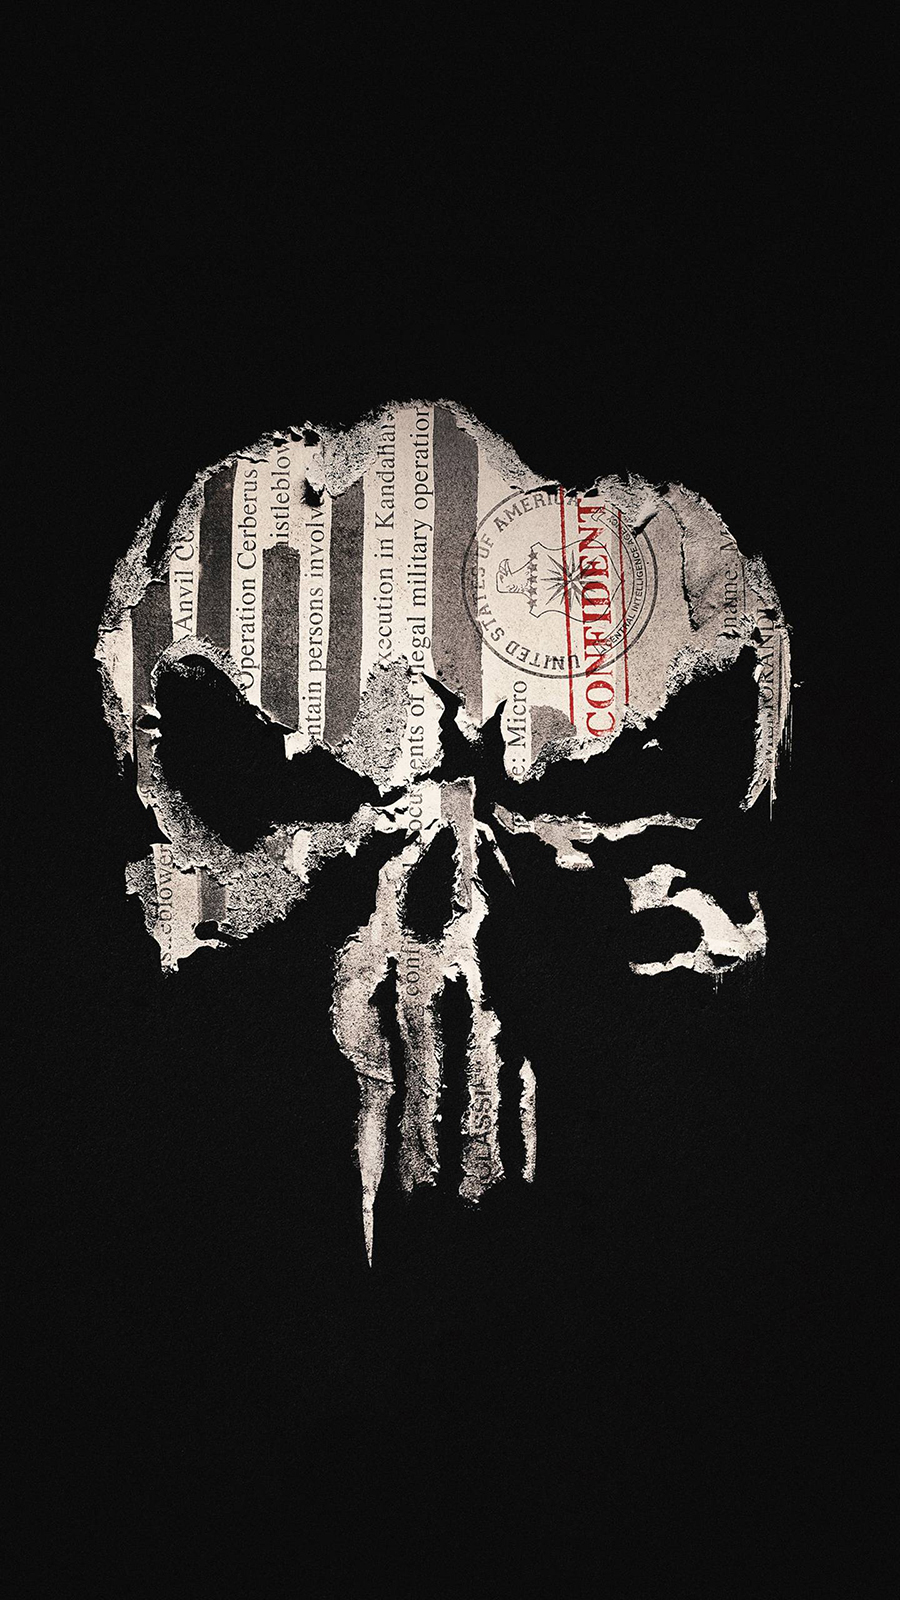 Punisher Wallpapers – Best Punisher Wallpapers Free Download